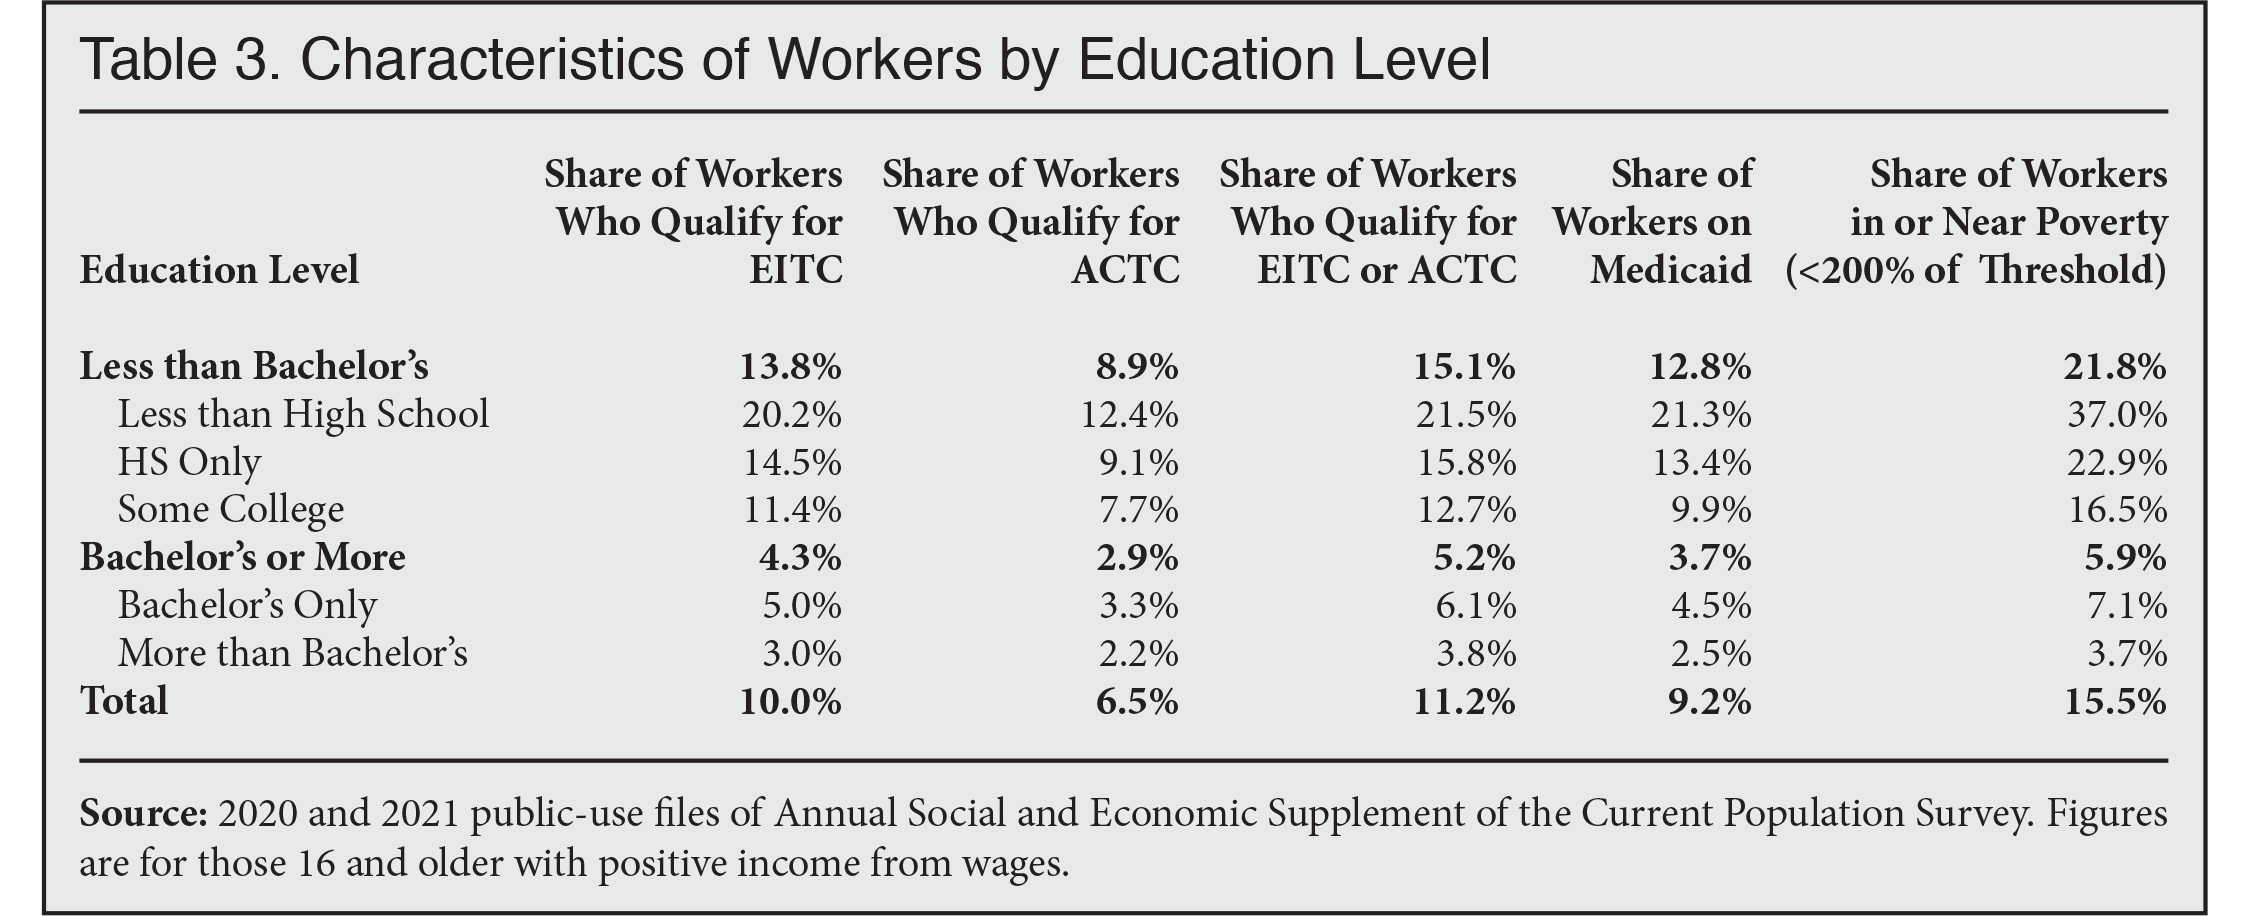 Table: Characteristics of Workers by Education Level